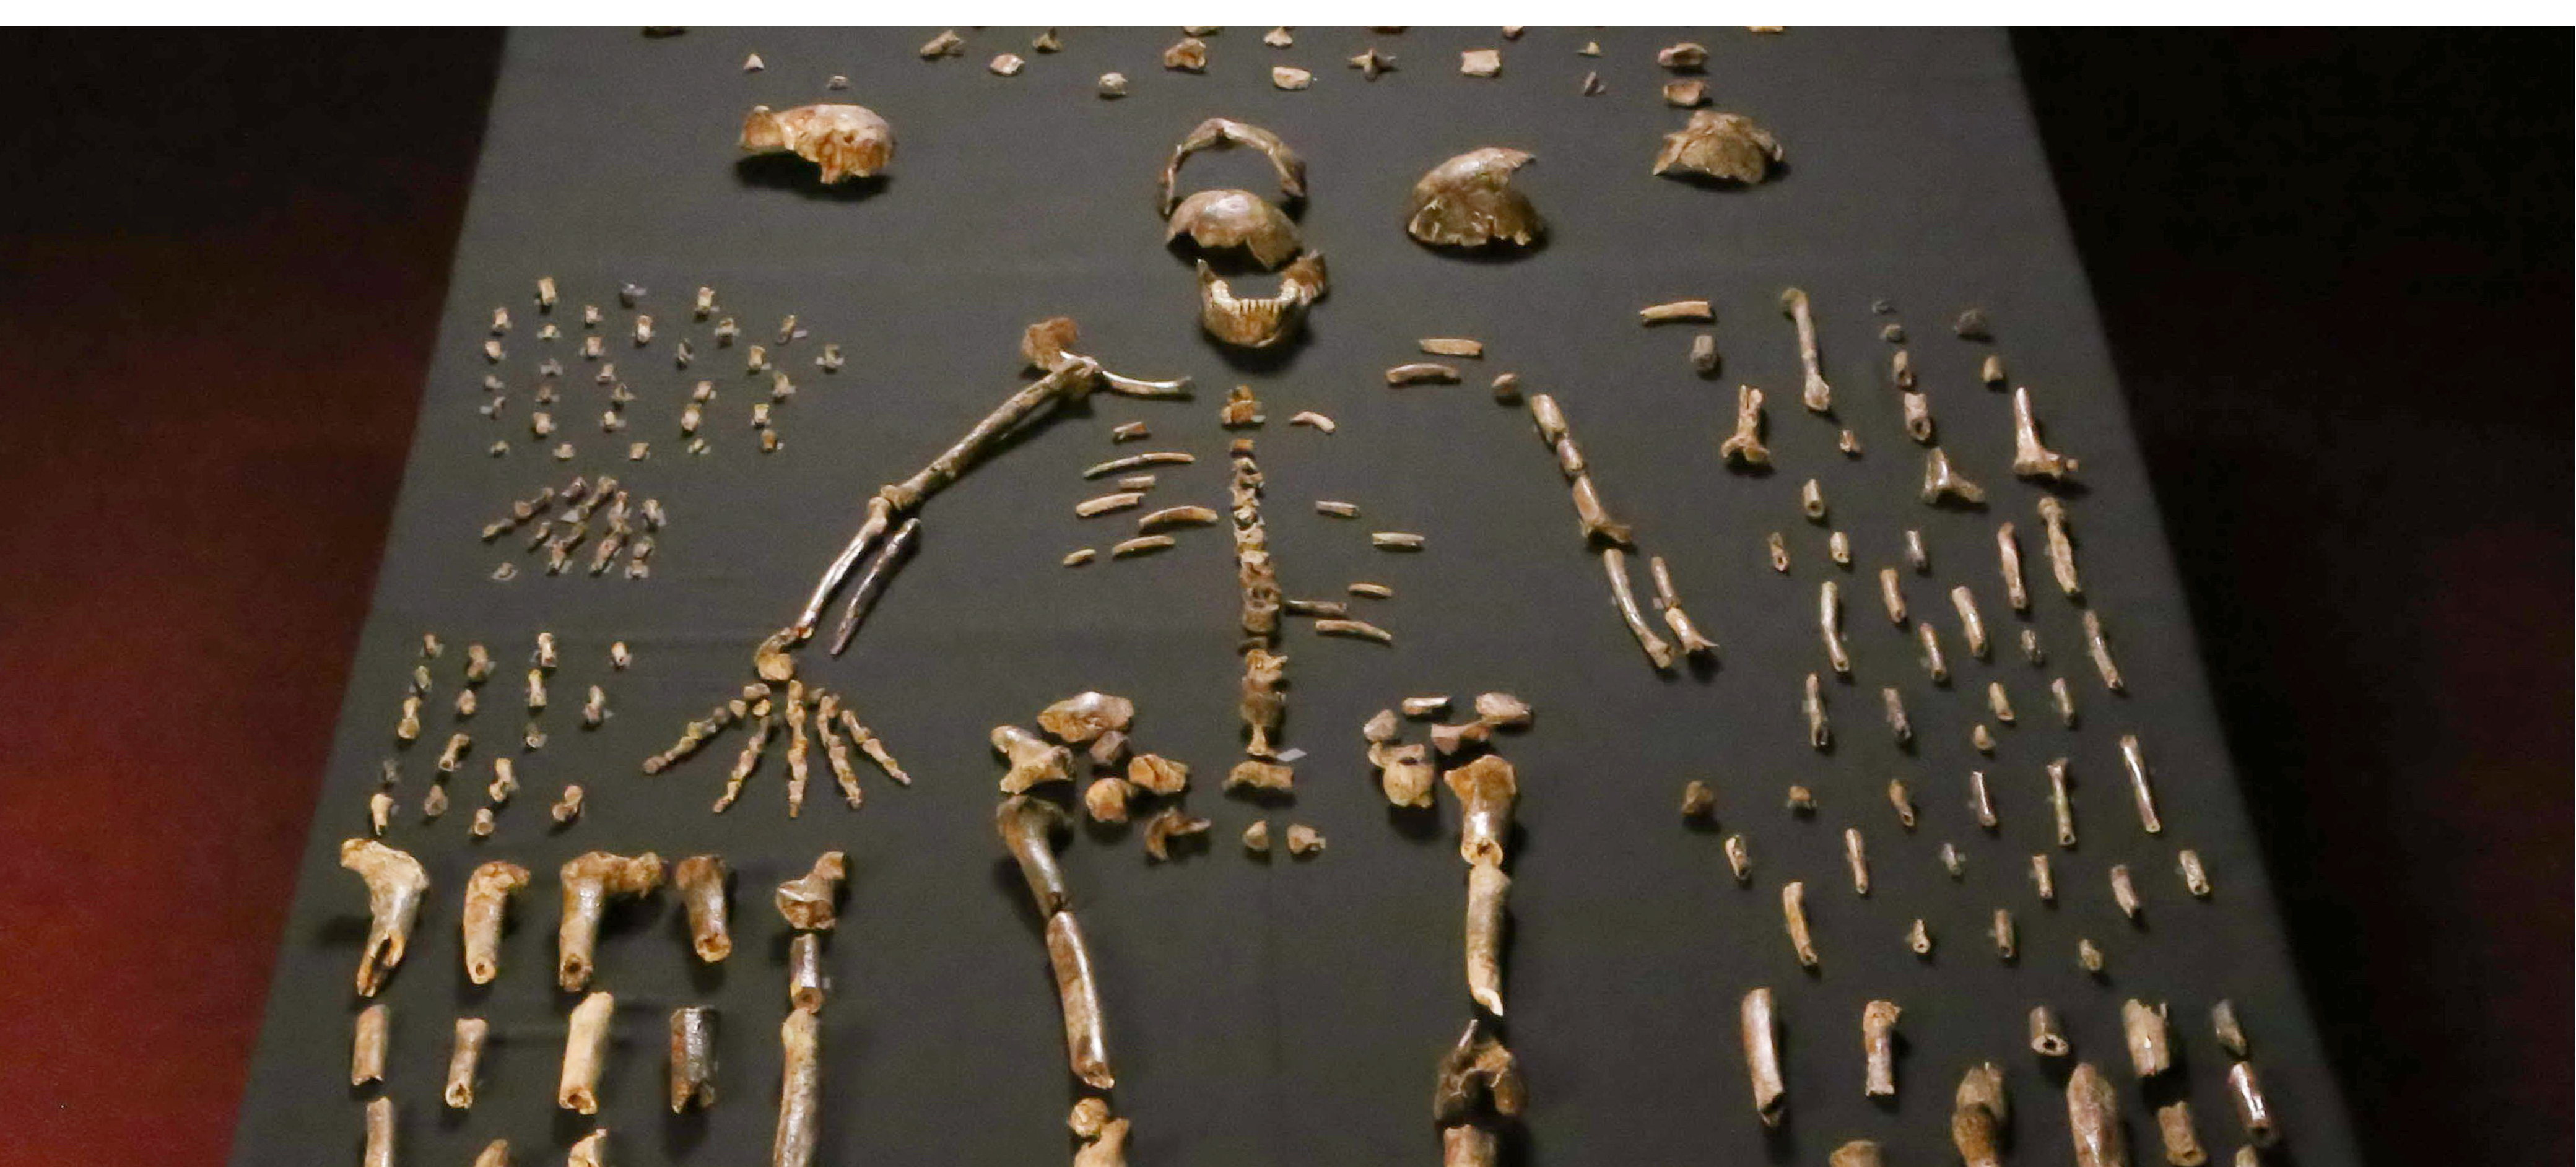 Homo naledi skeletal remains, made up from a composite of elements that represent multiple individuals.